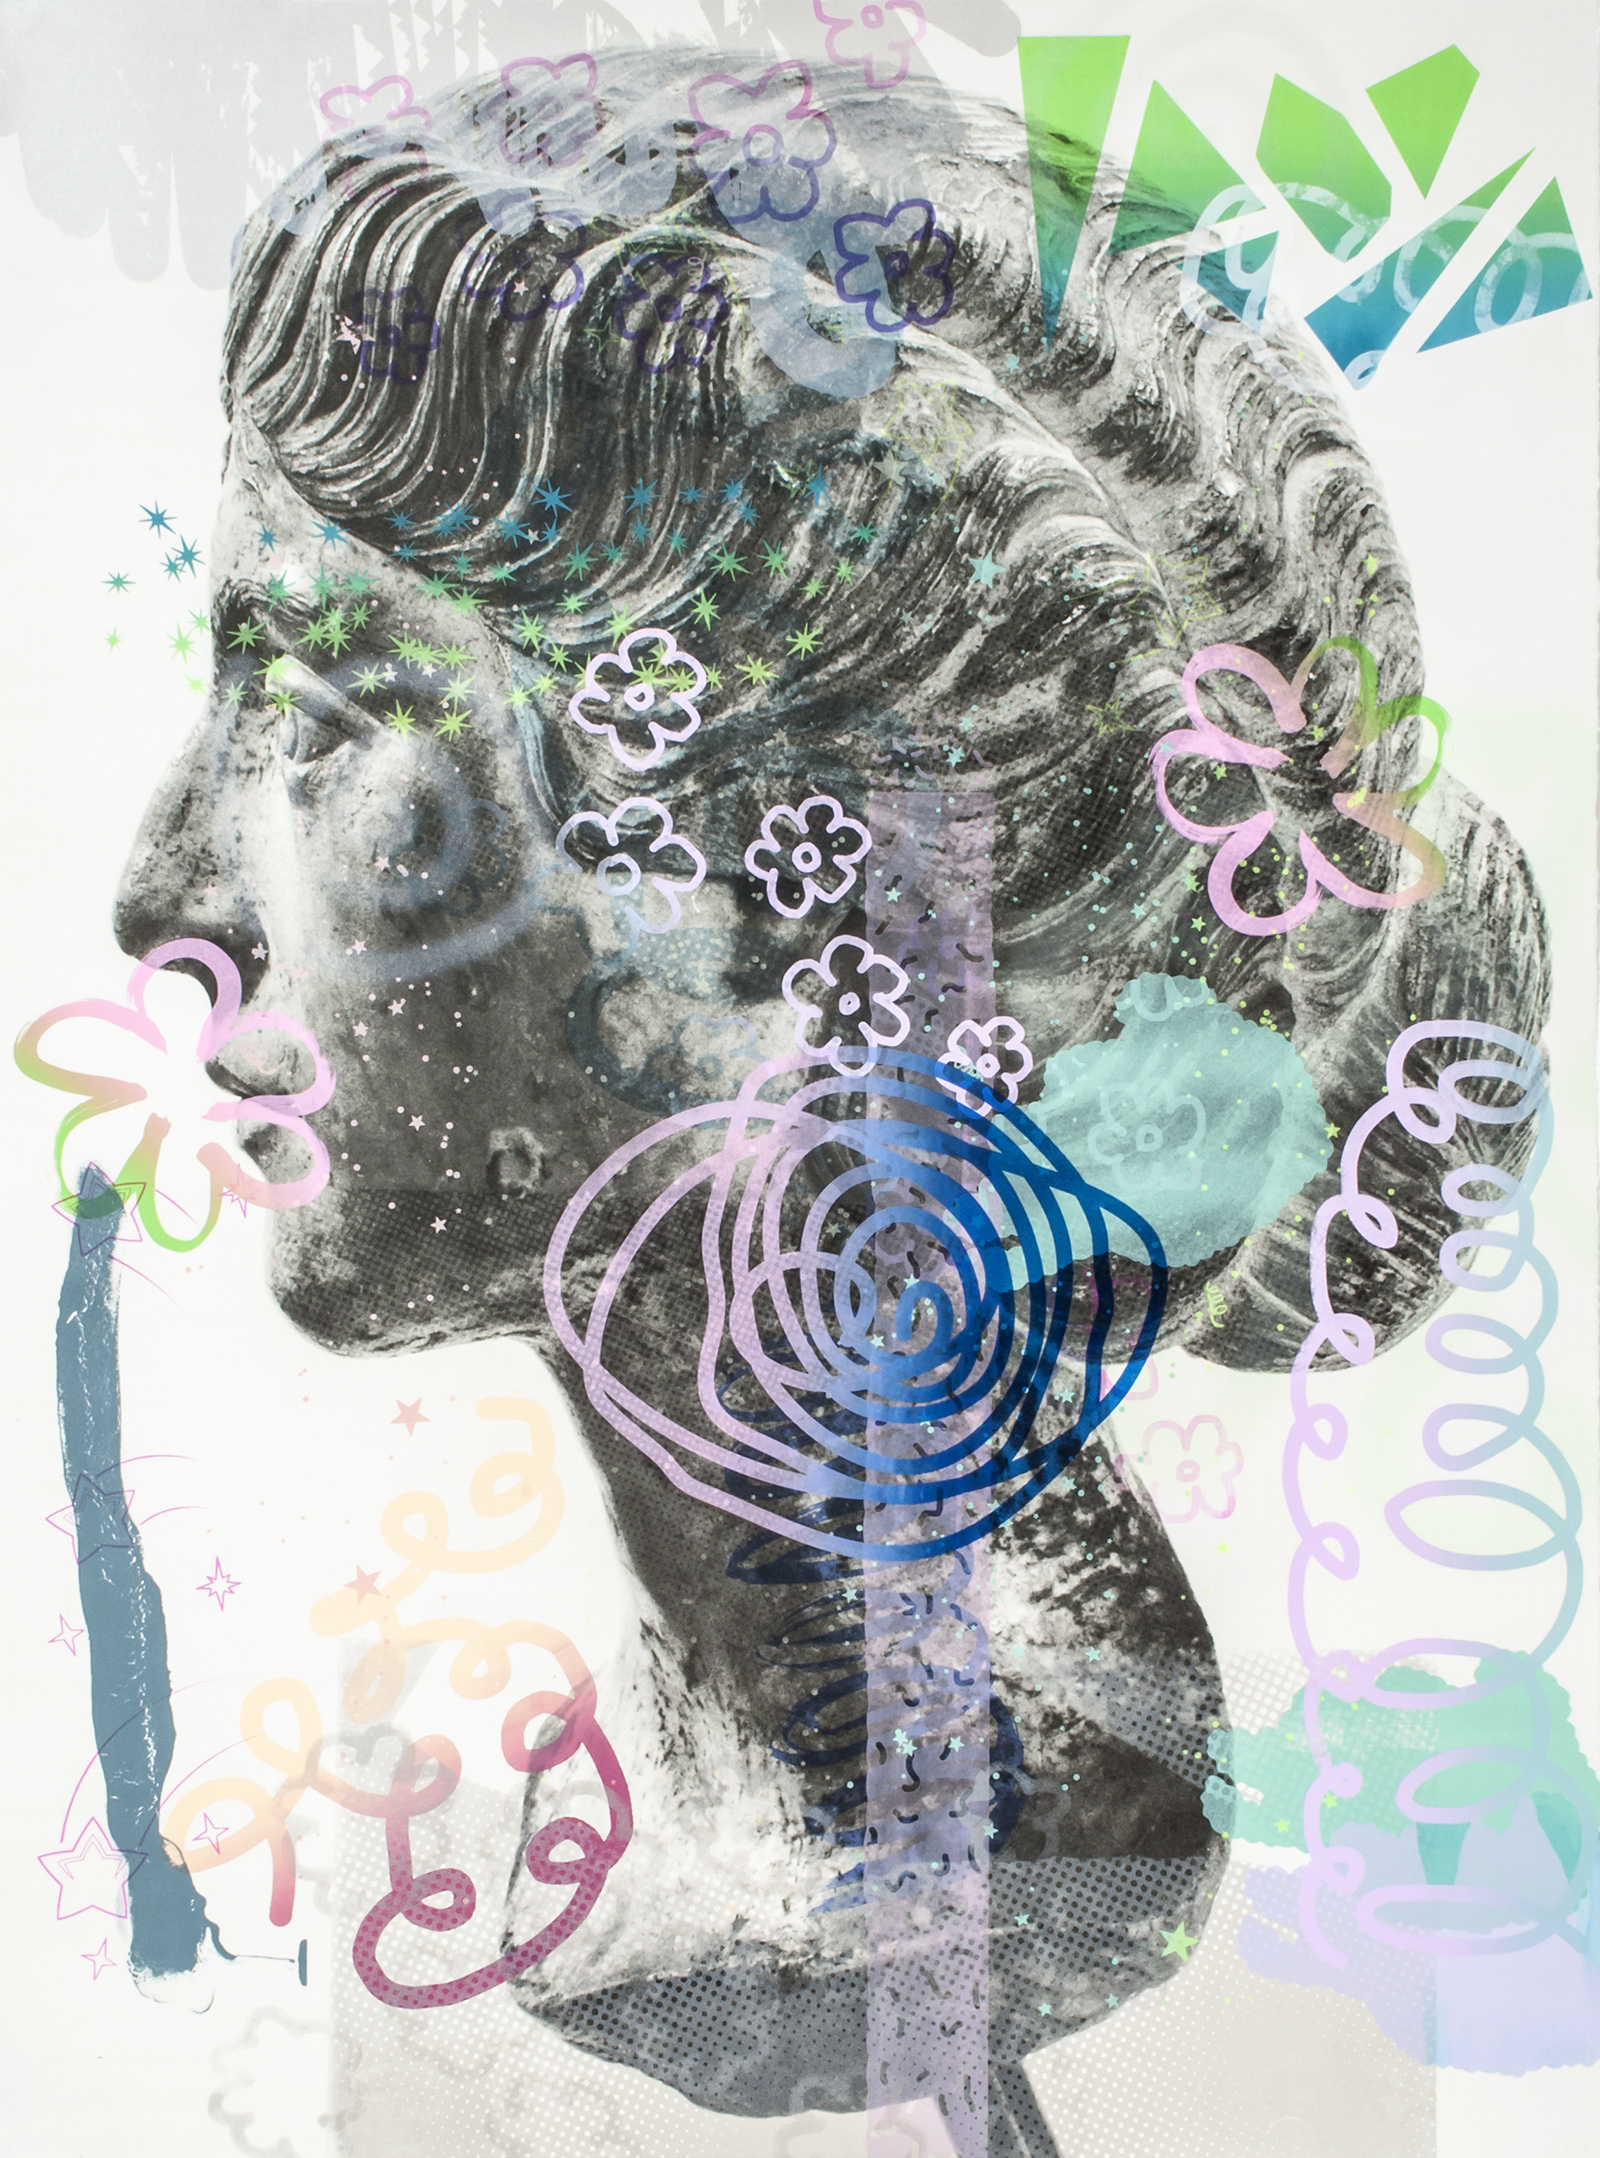 It Girl (Maybe a Daughter of Faustina the Younger) | screen print on archival inkjet print | 39.5"x29" | 2016